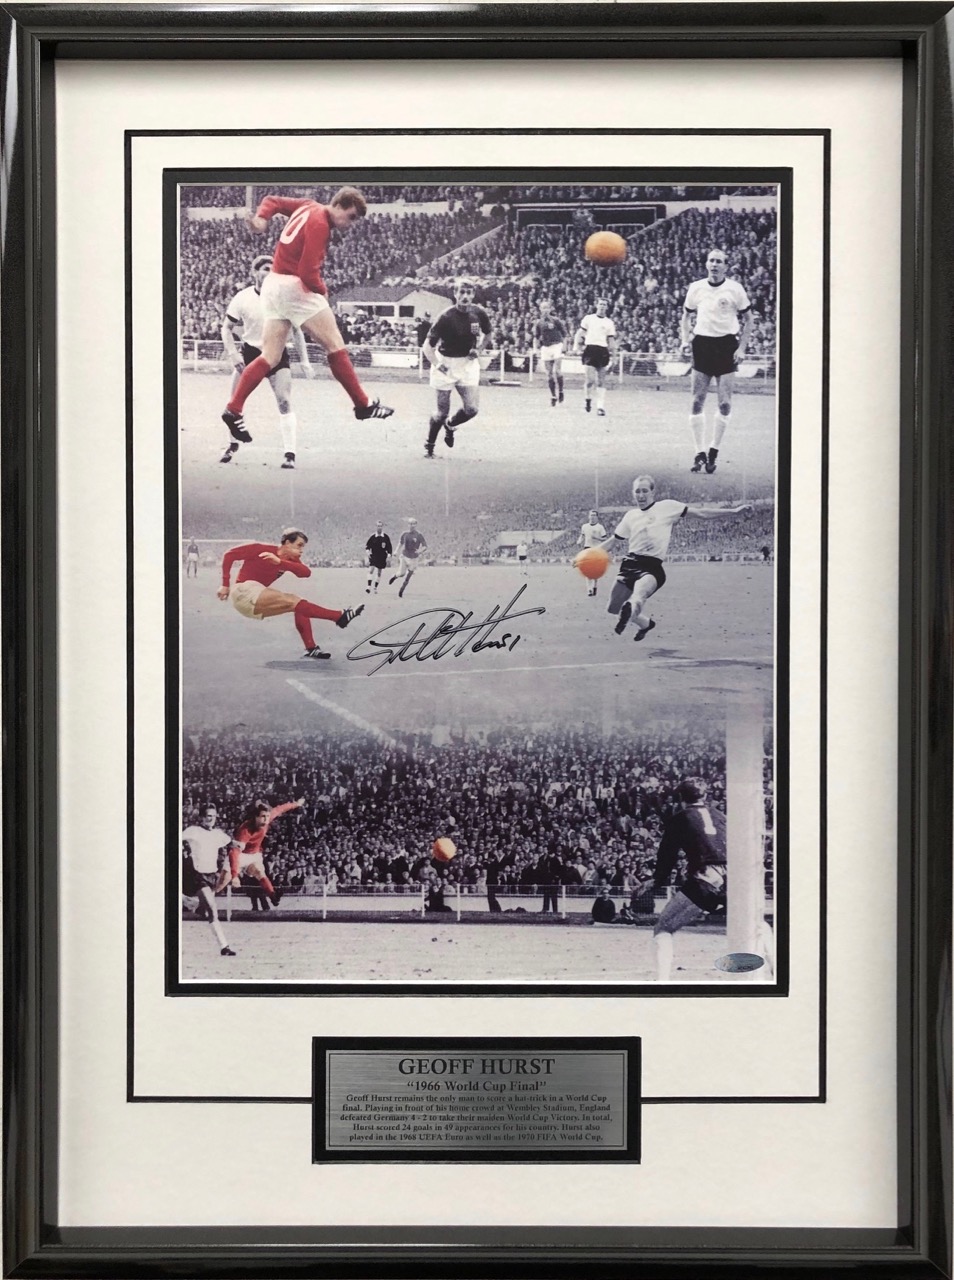 Sir Geoff Hurst Signed England Soccer Photograph 1966 World Cup